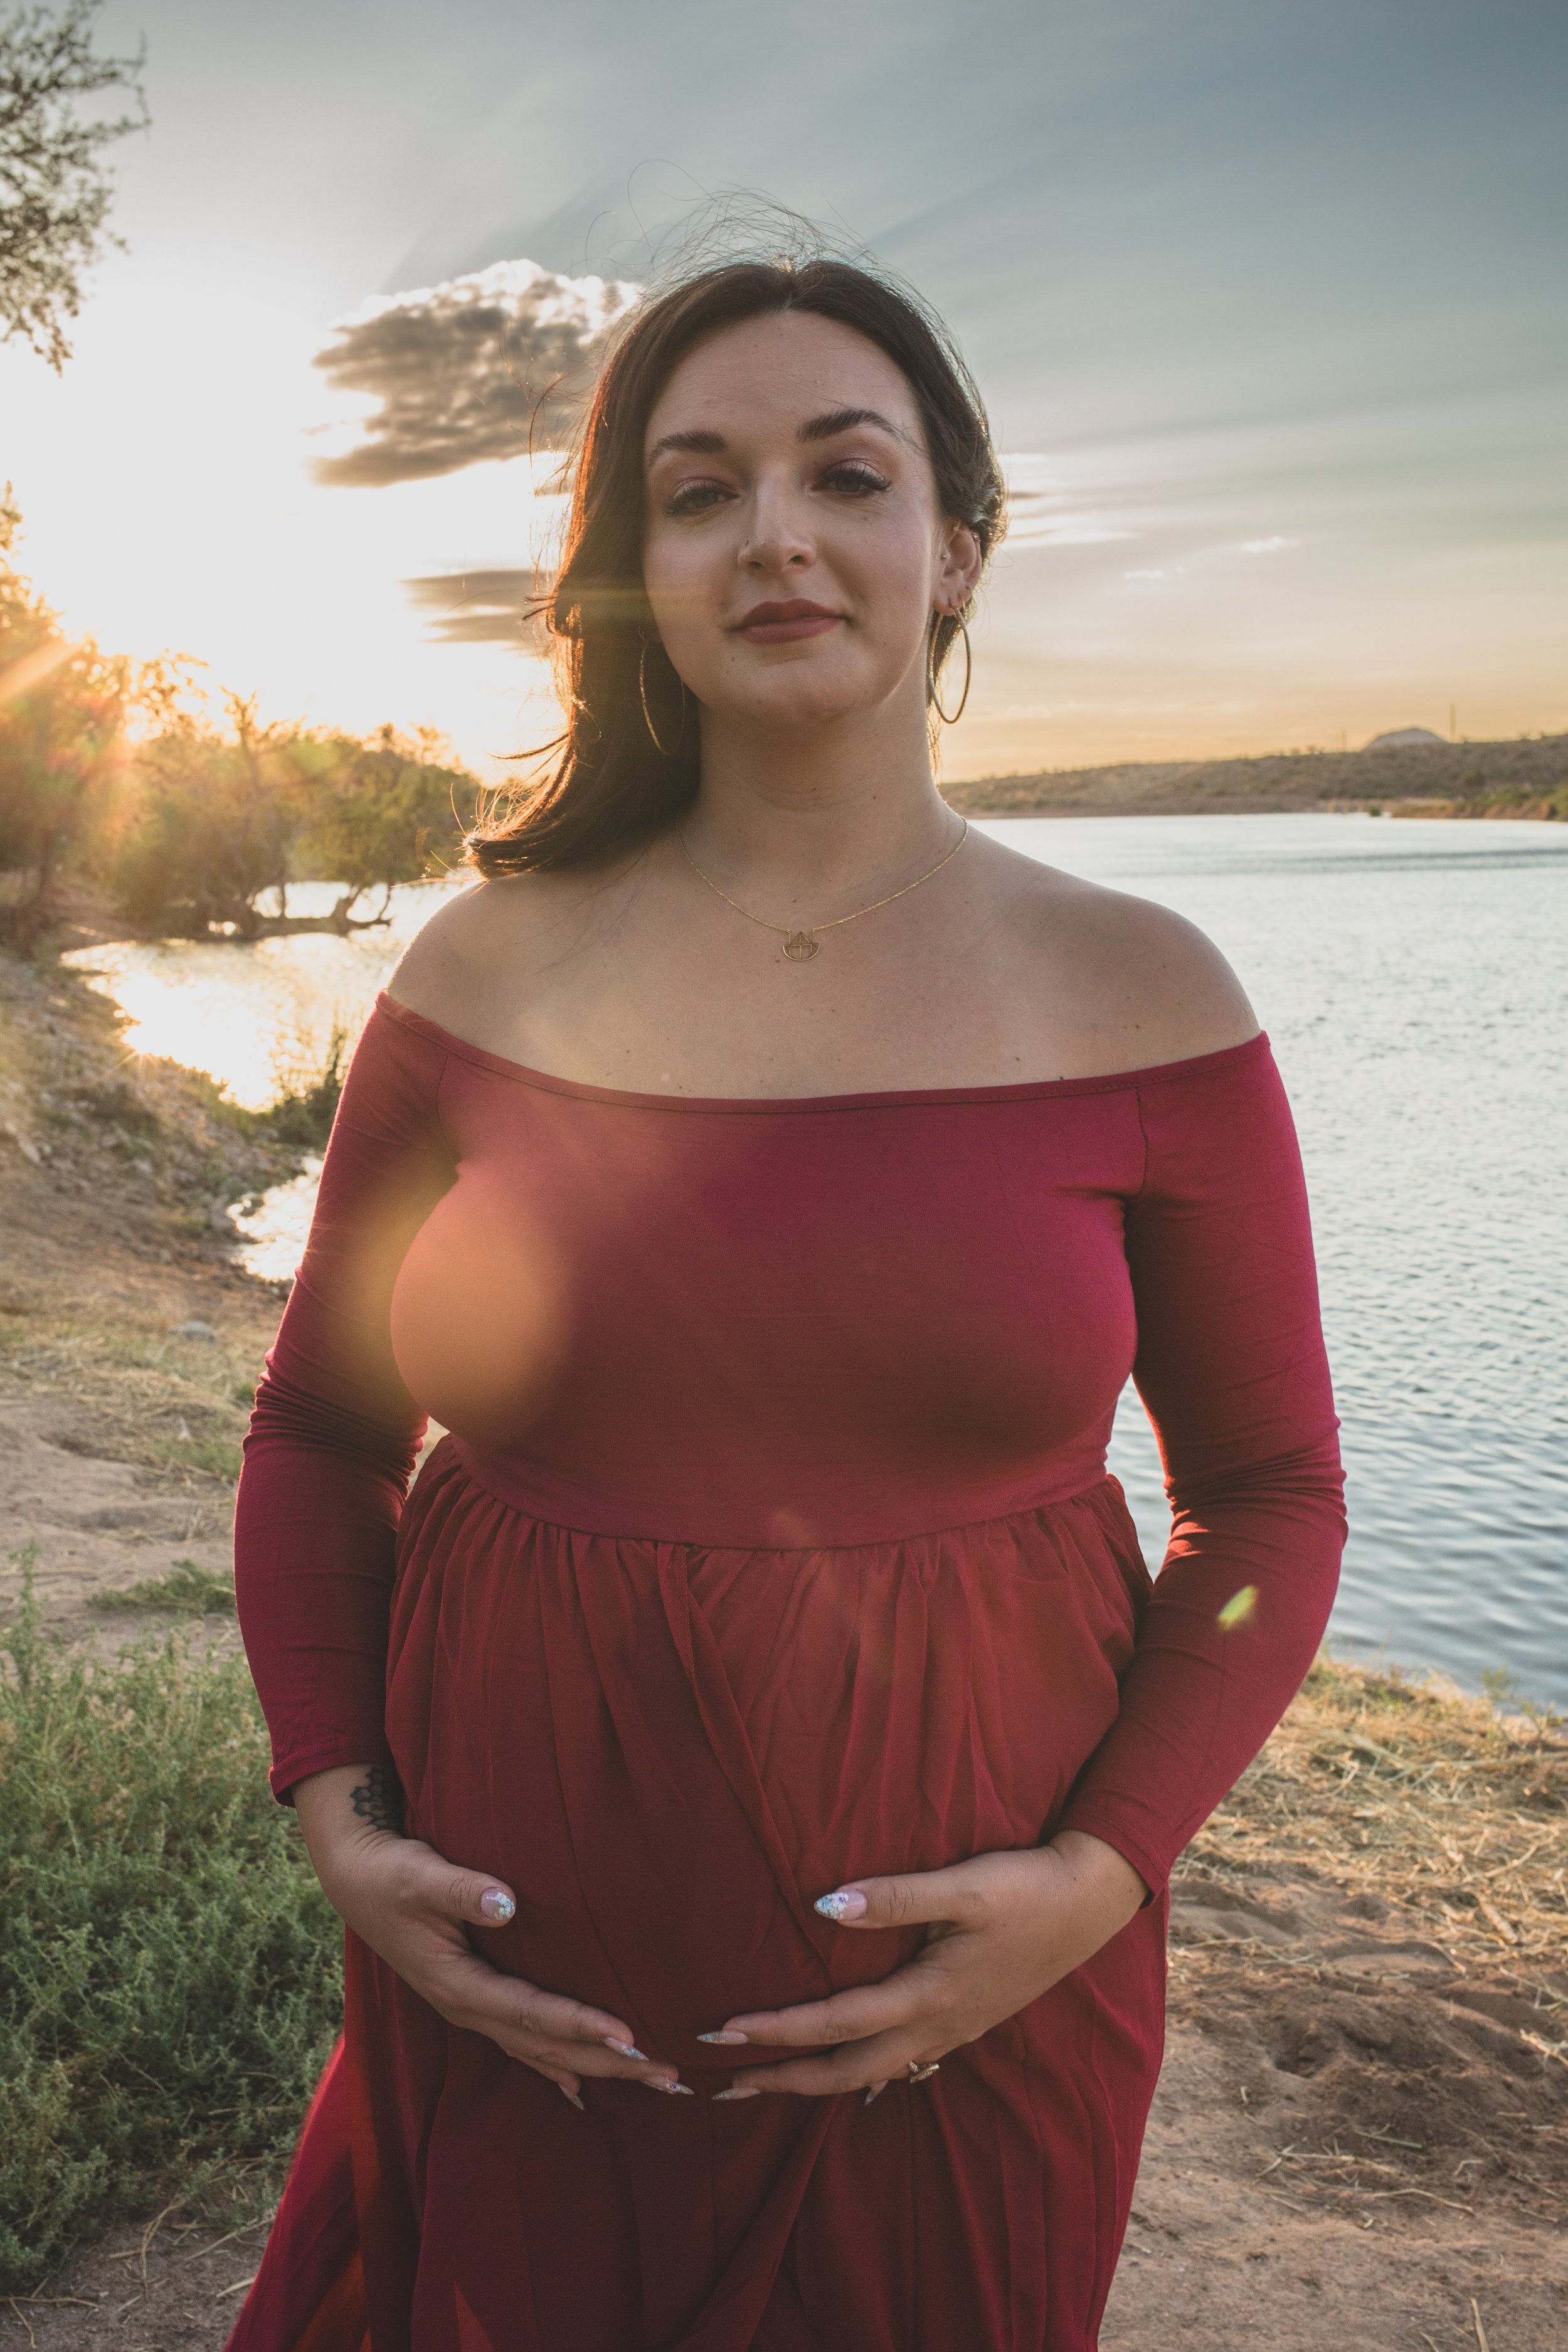 Mother-to-be's poses with her pregnant belly in a red dress for maternity photos in front of the Salt River and mountain by the best maternity photographer in Phoenix; Jennifer Lind Schutsky.